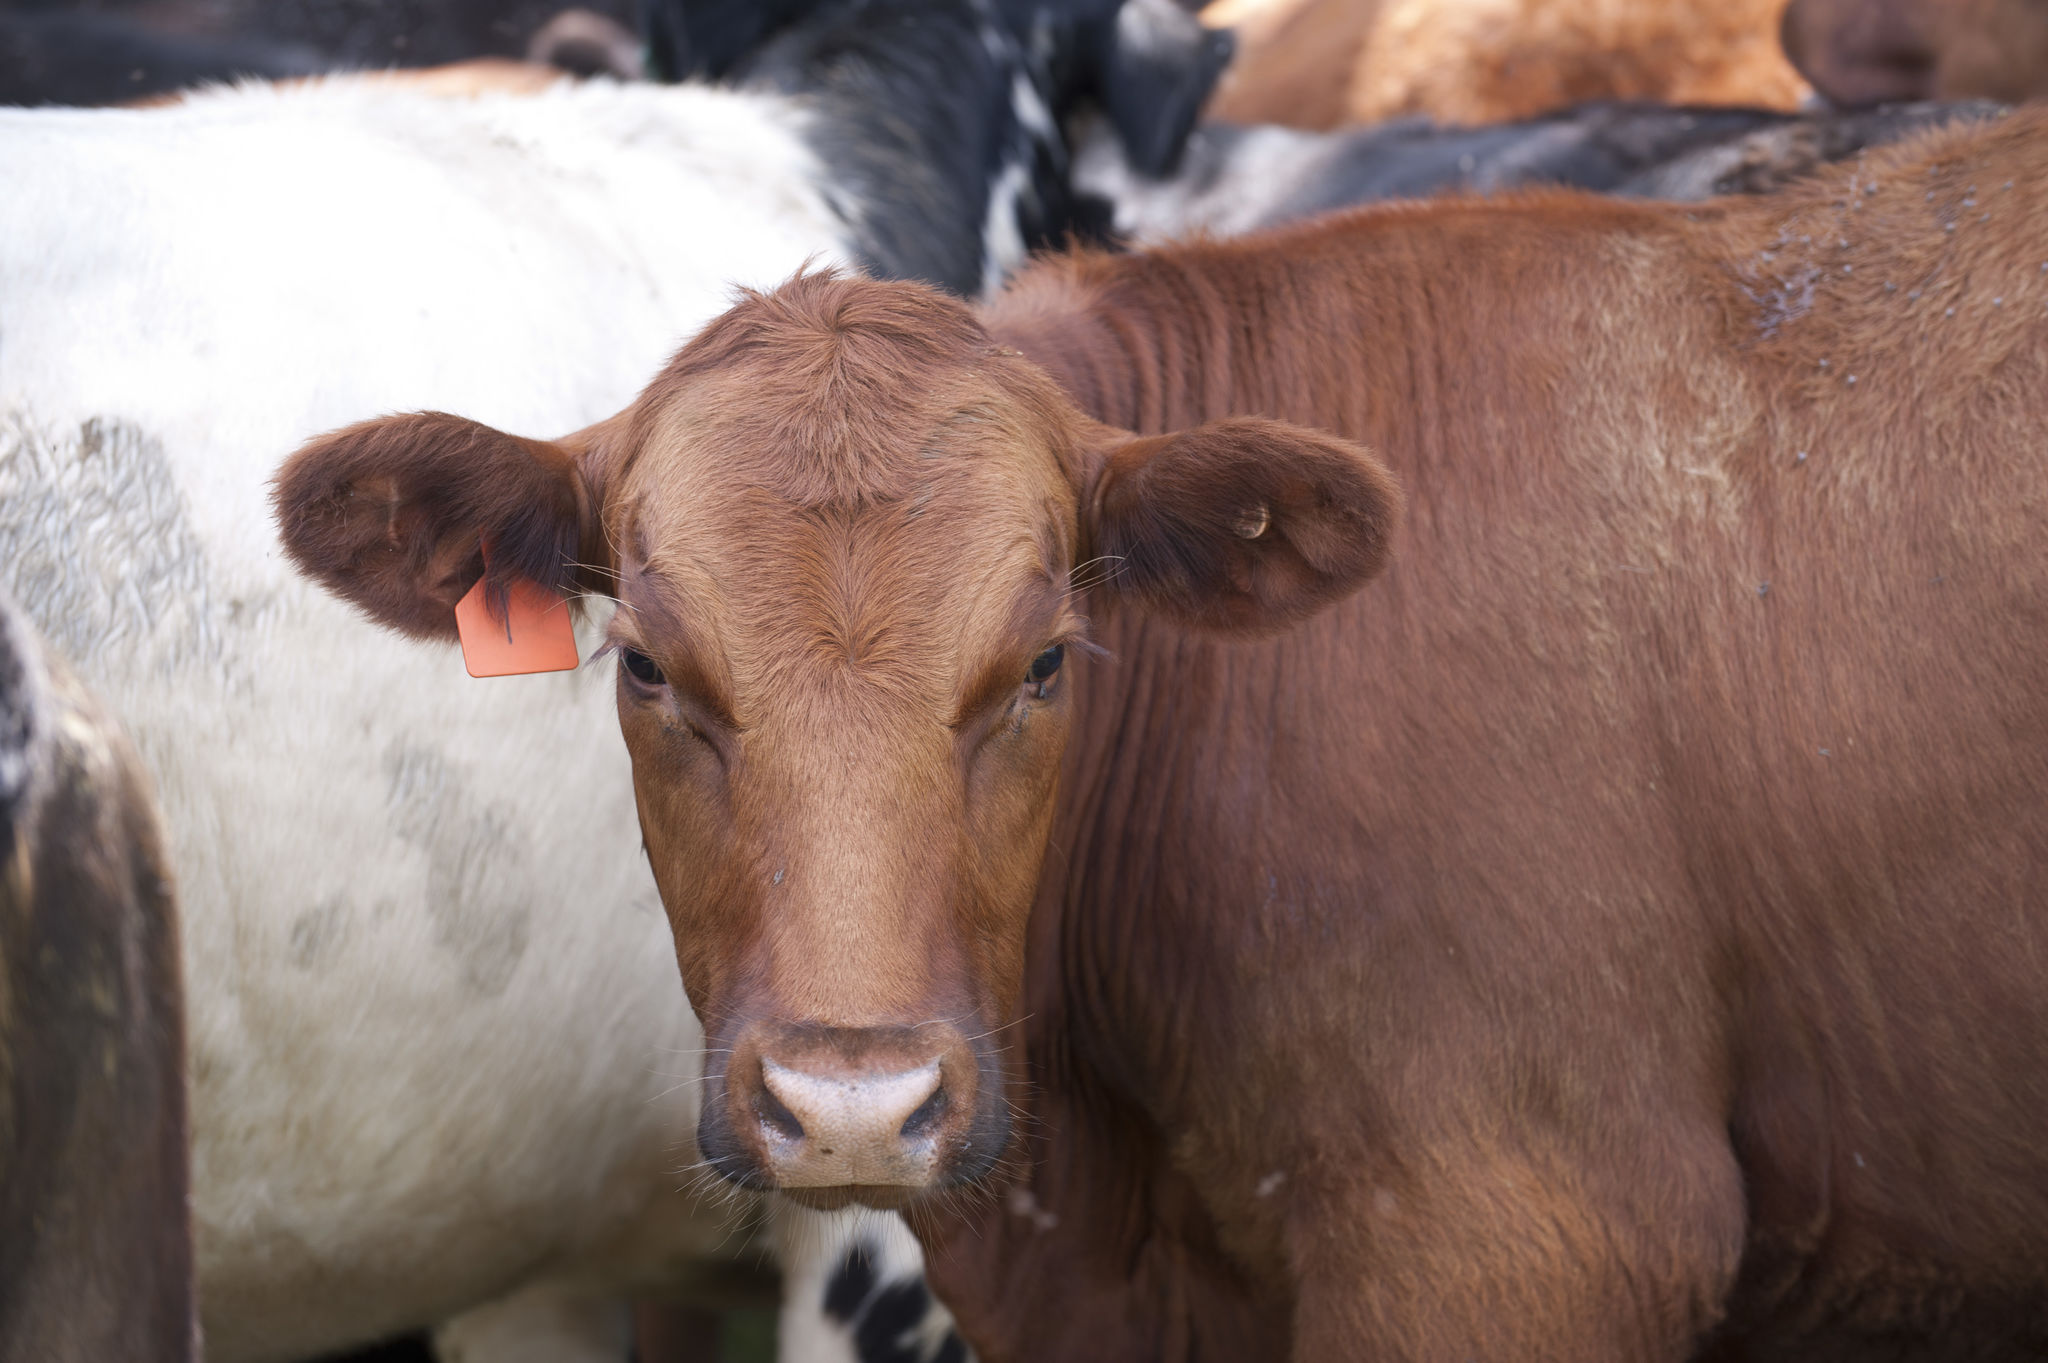 Growth promoting hormones in beef production and marketing | UMN Extension